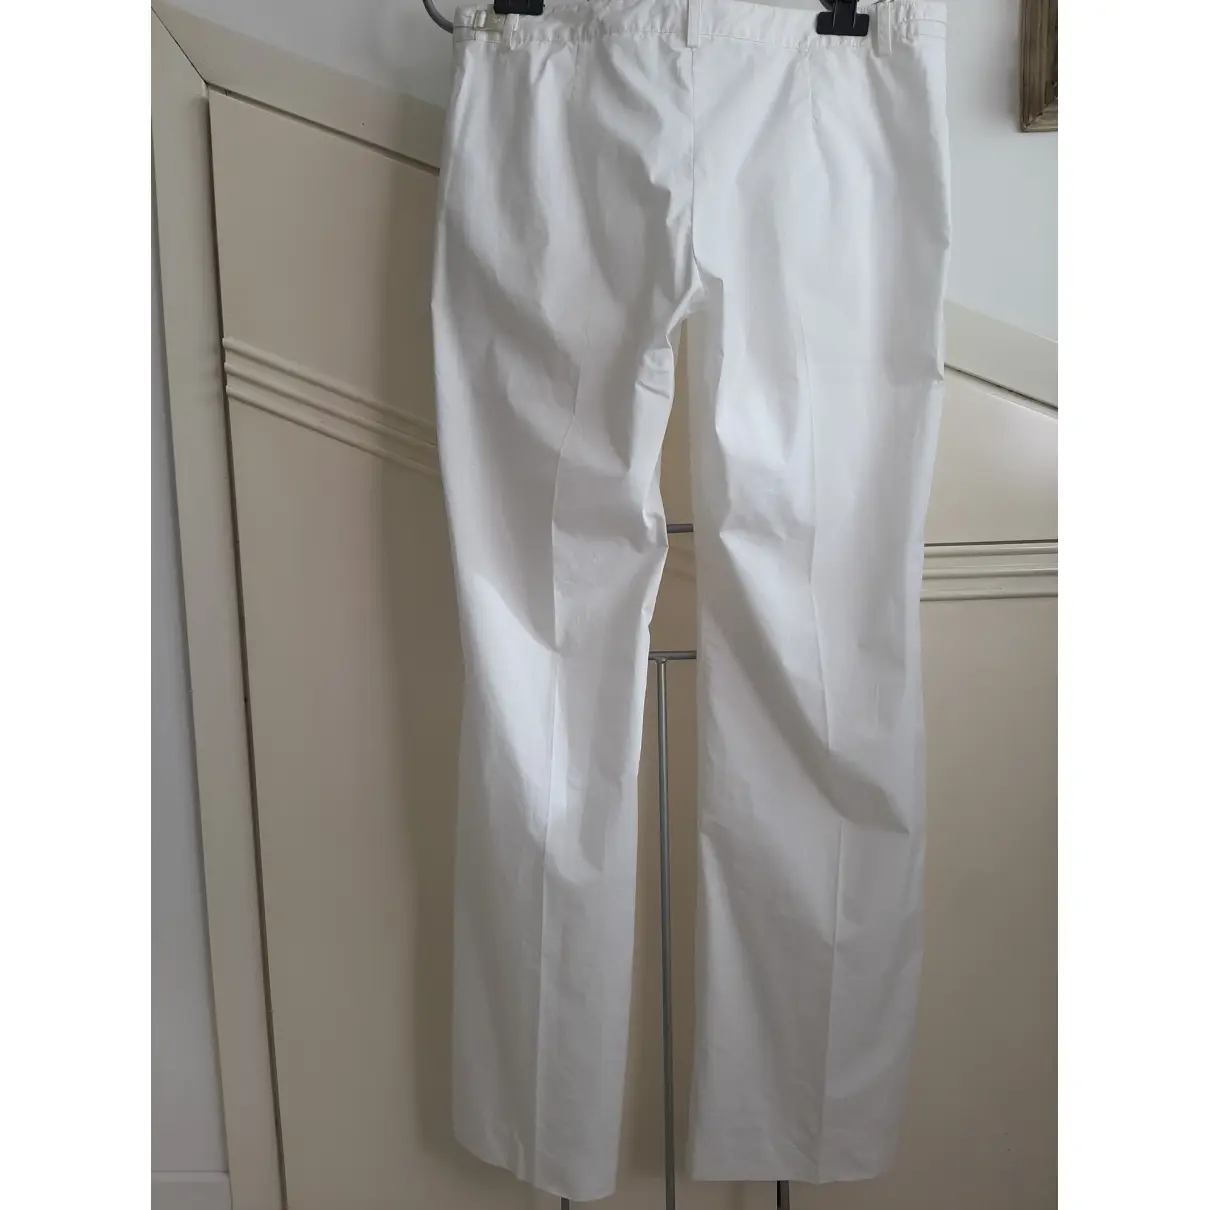 Fay Large pants for sale